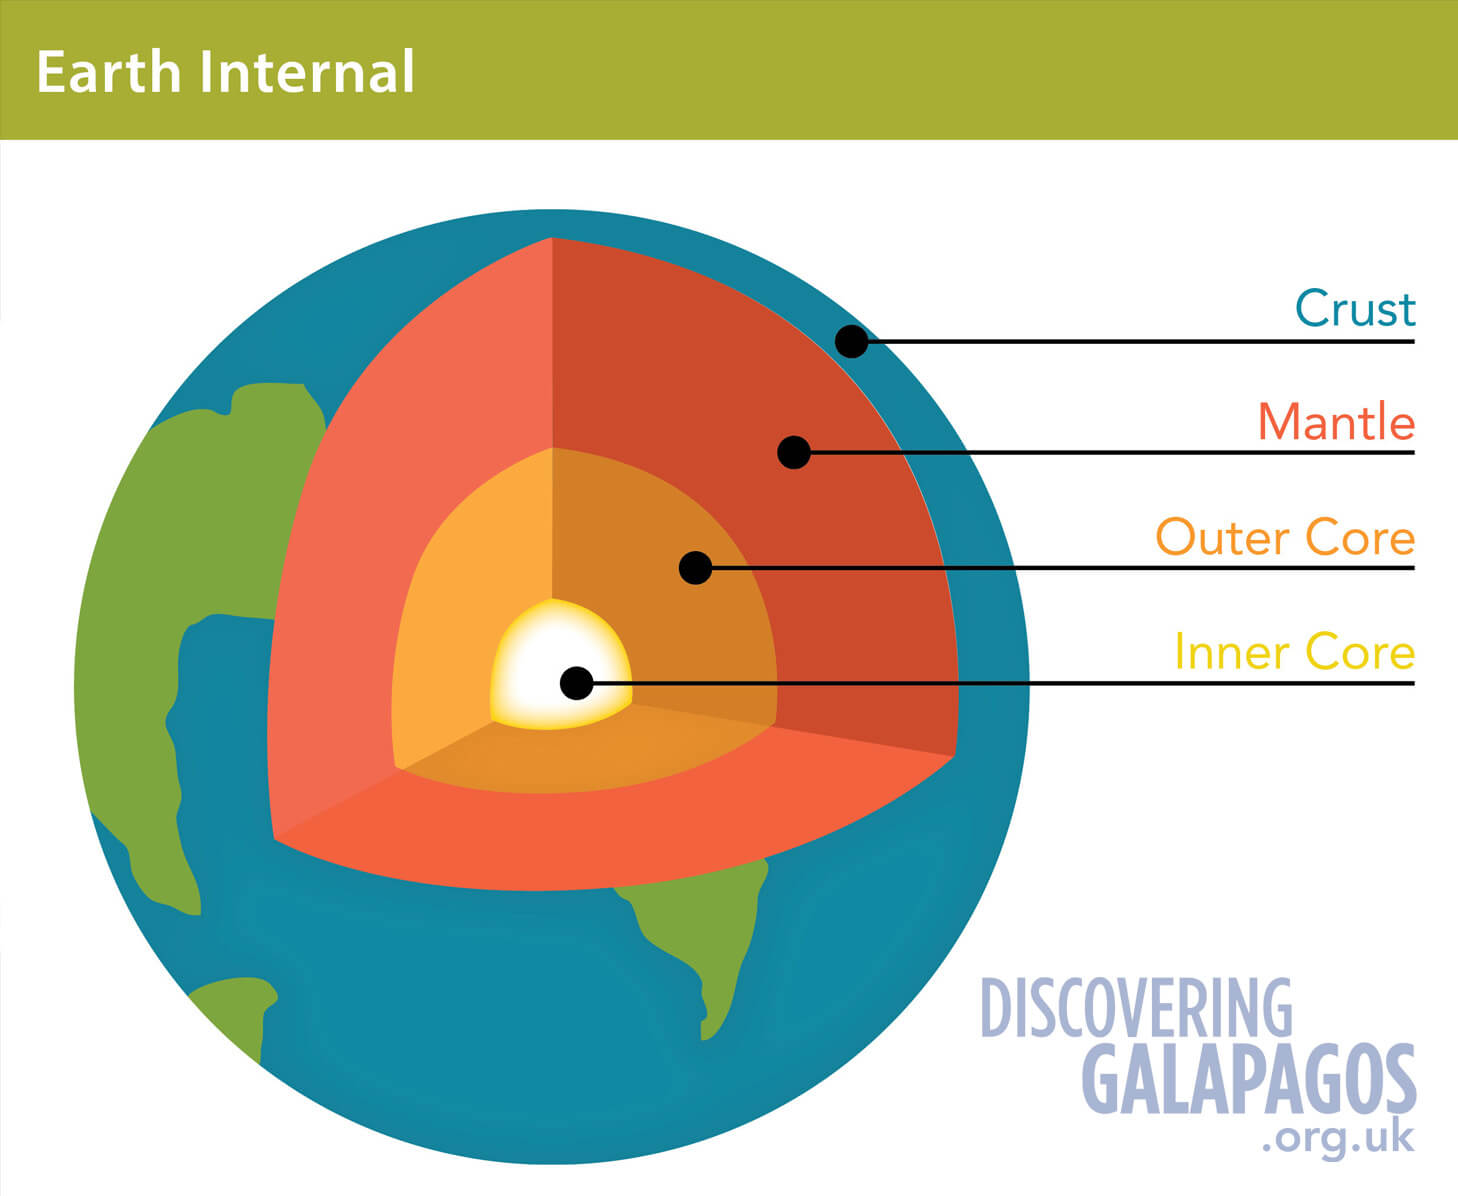 Galapagos Graphics: Earth Internal © Galapagos Conservation Trust